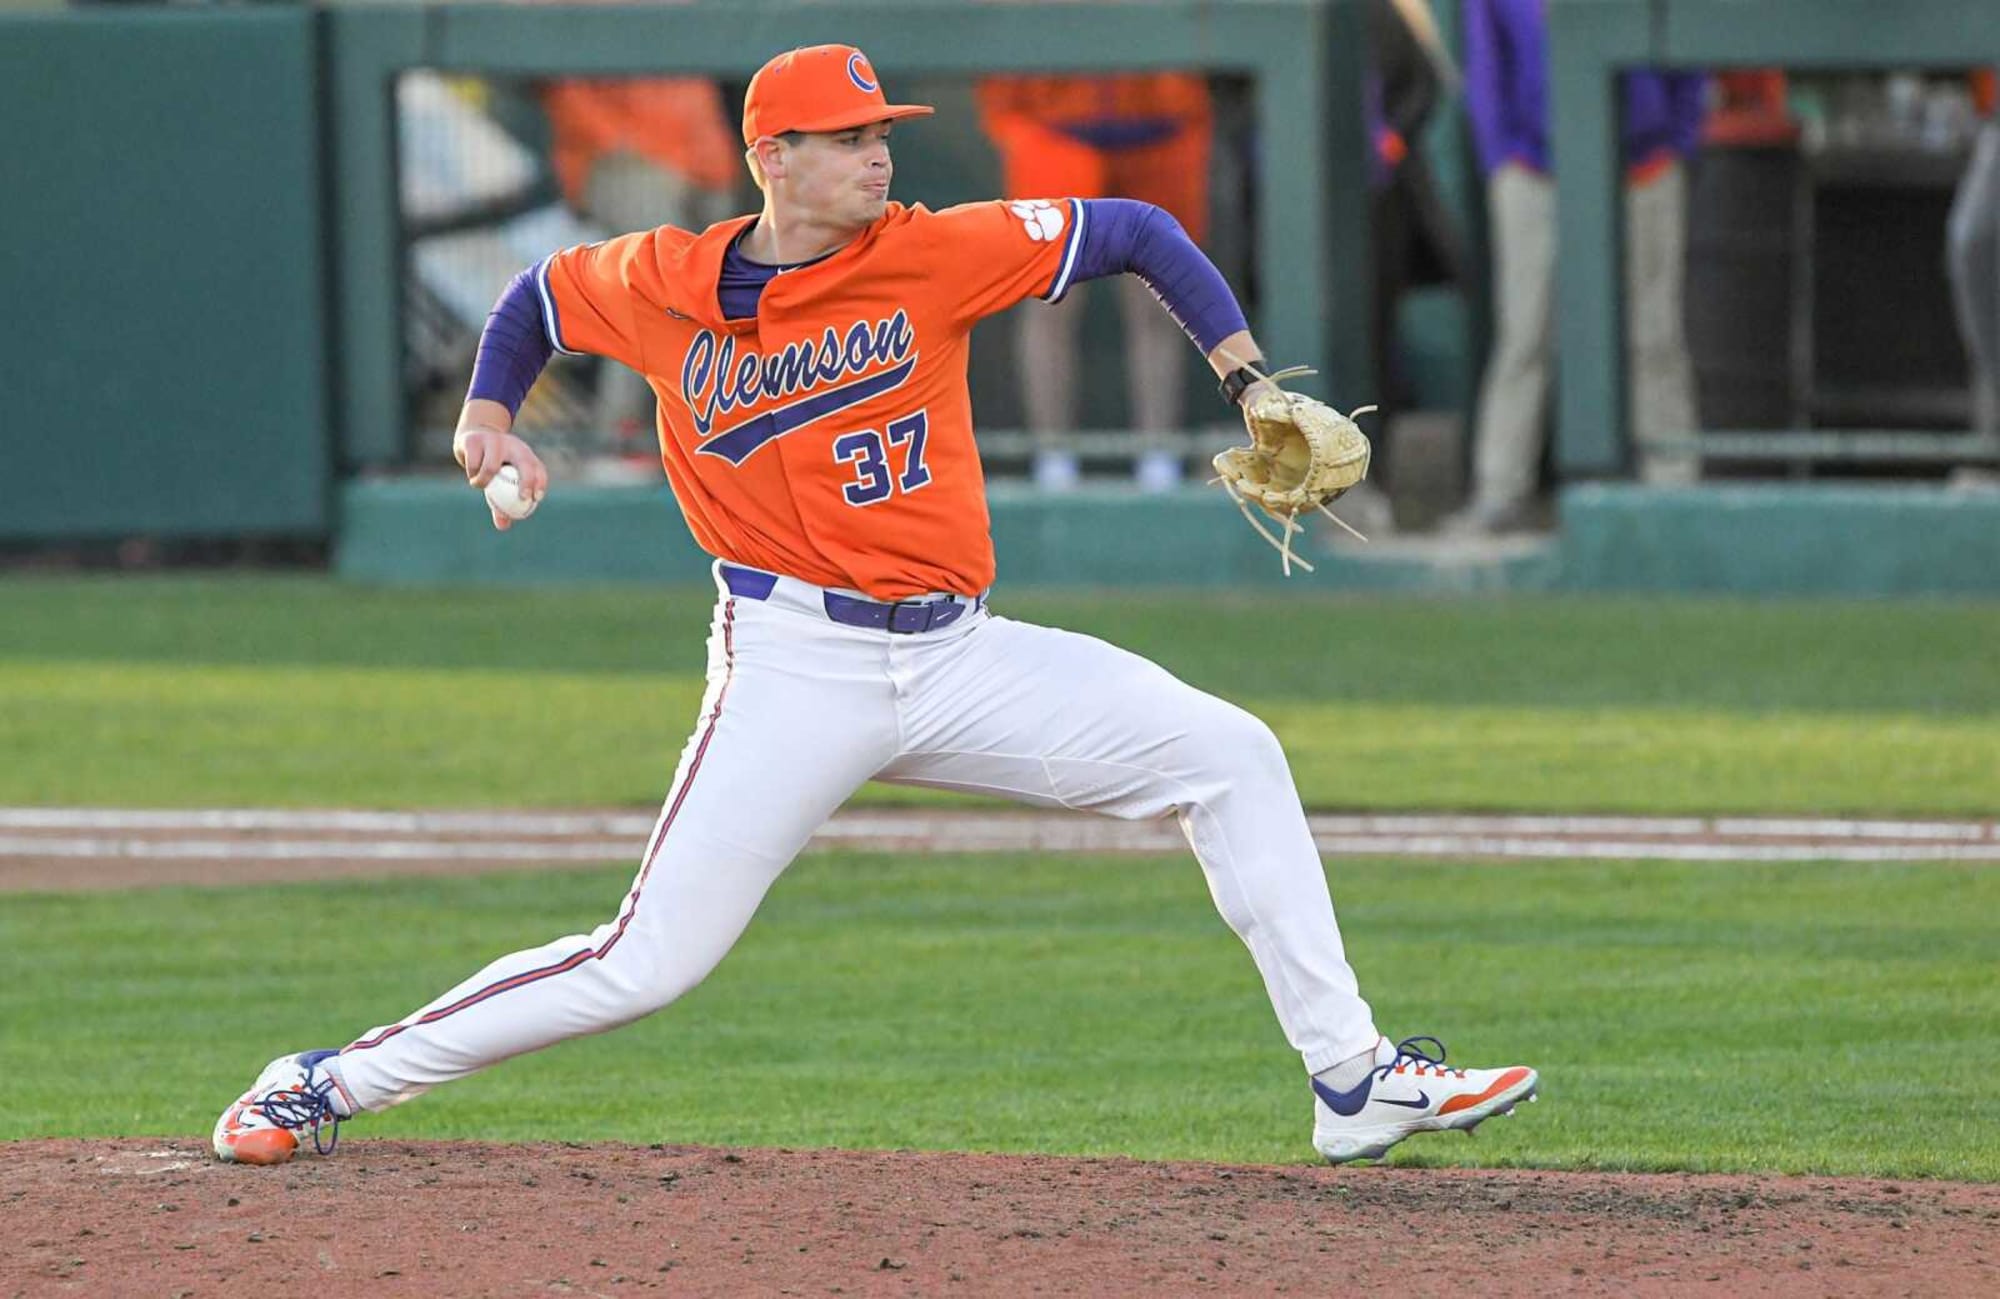 Clemson baseball completes 50 week with sweep of doubleheader